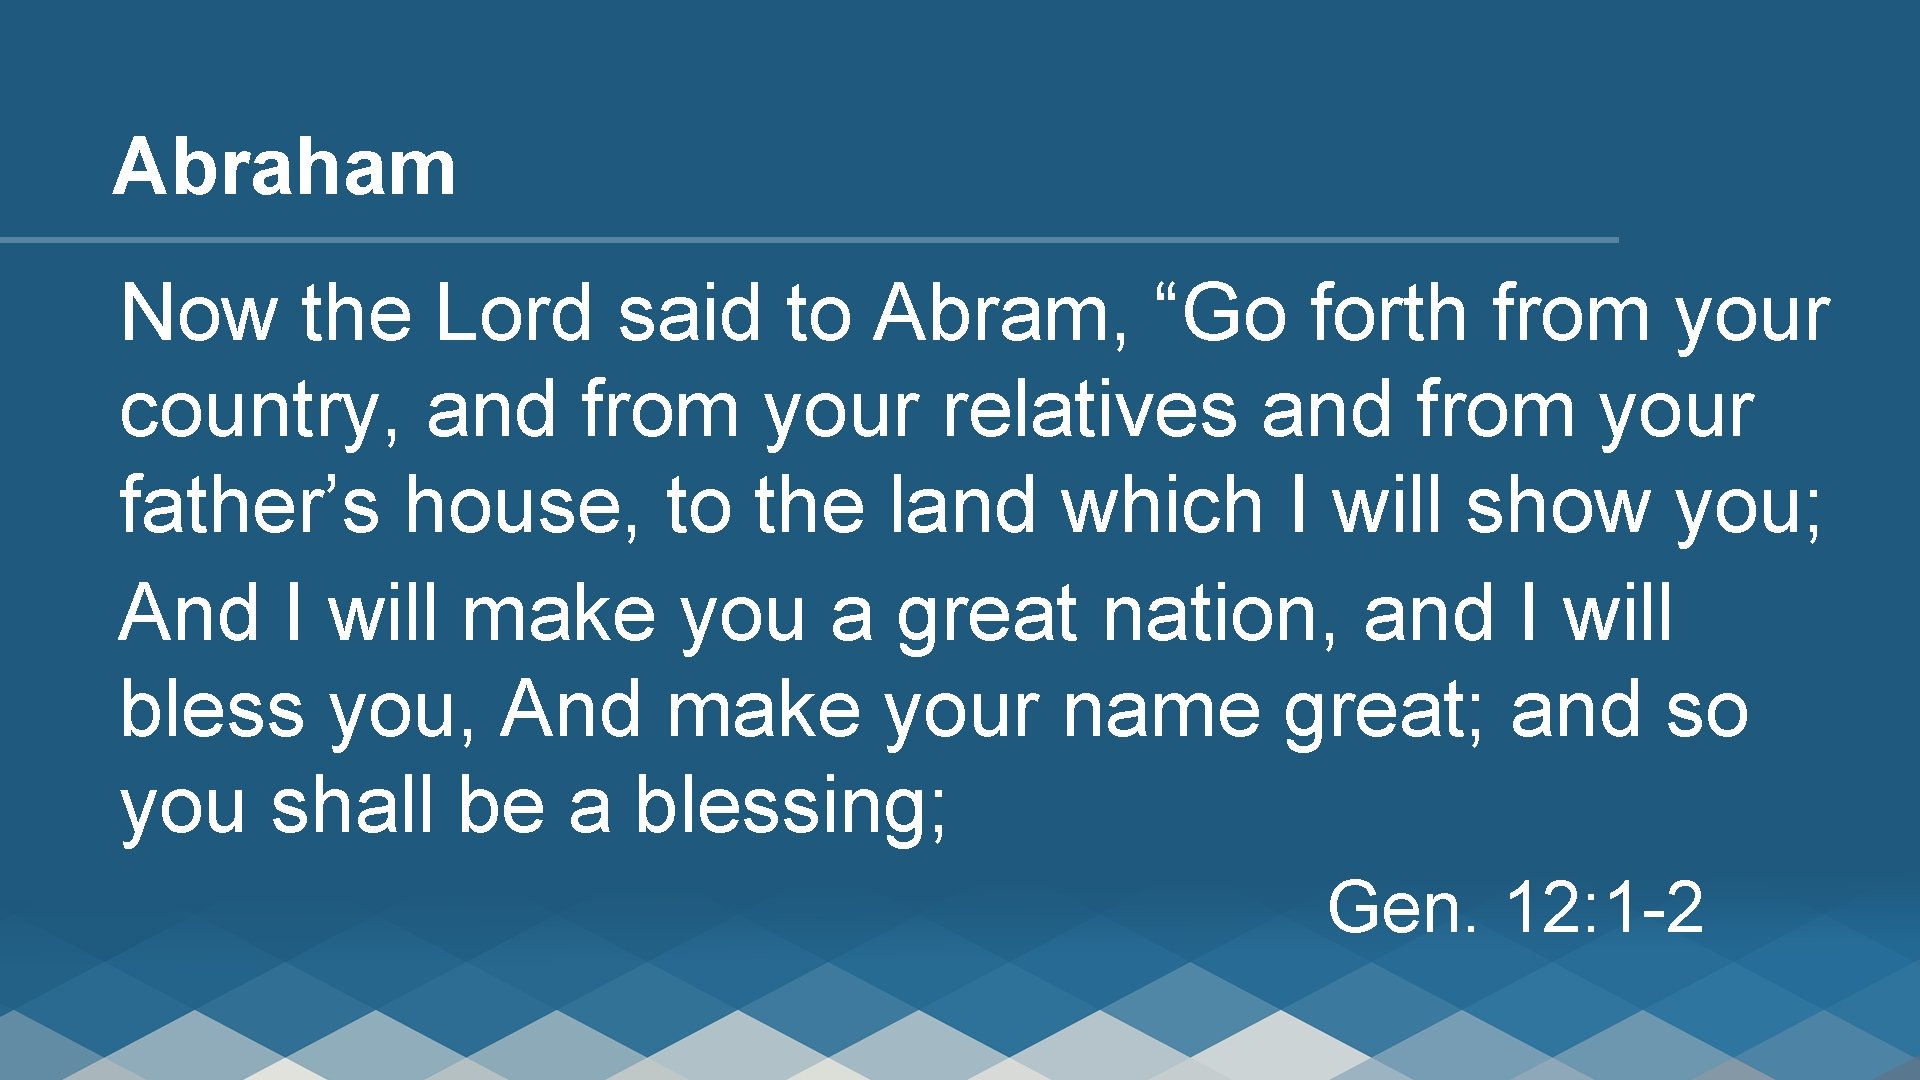 Abraham Now the Lord said to Abram, “Go forth from your country, and from